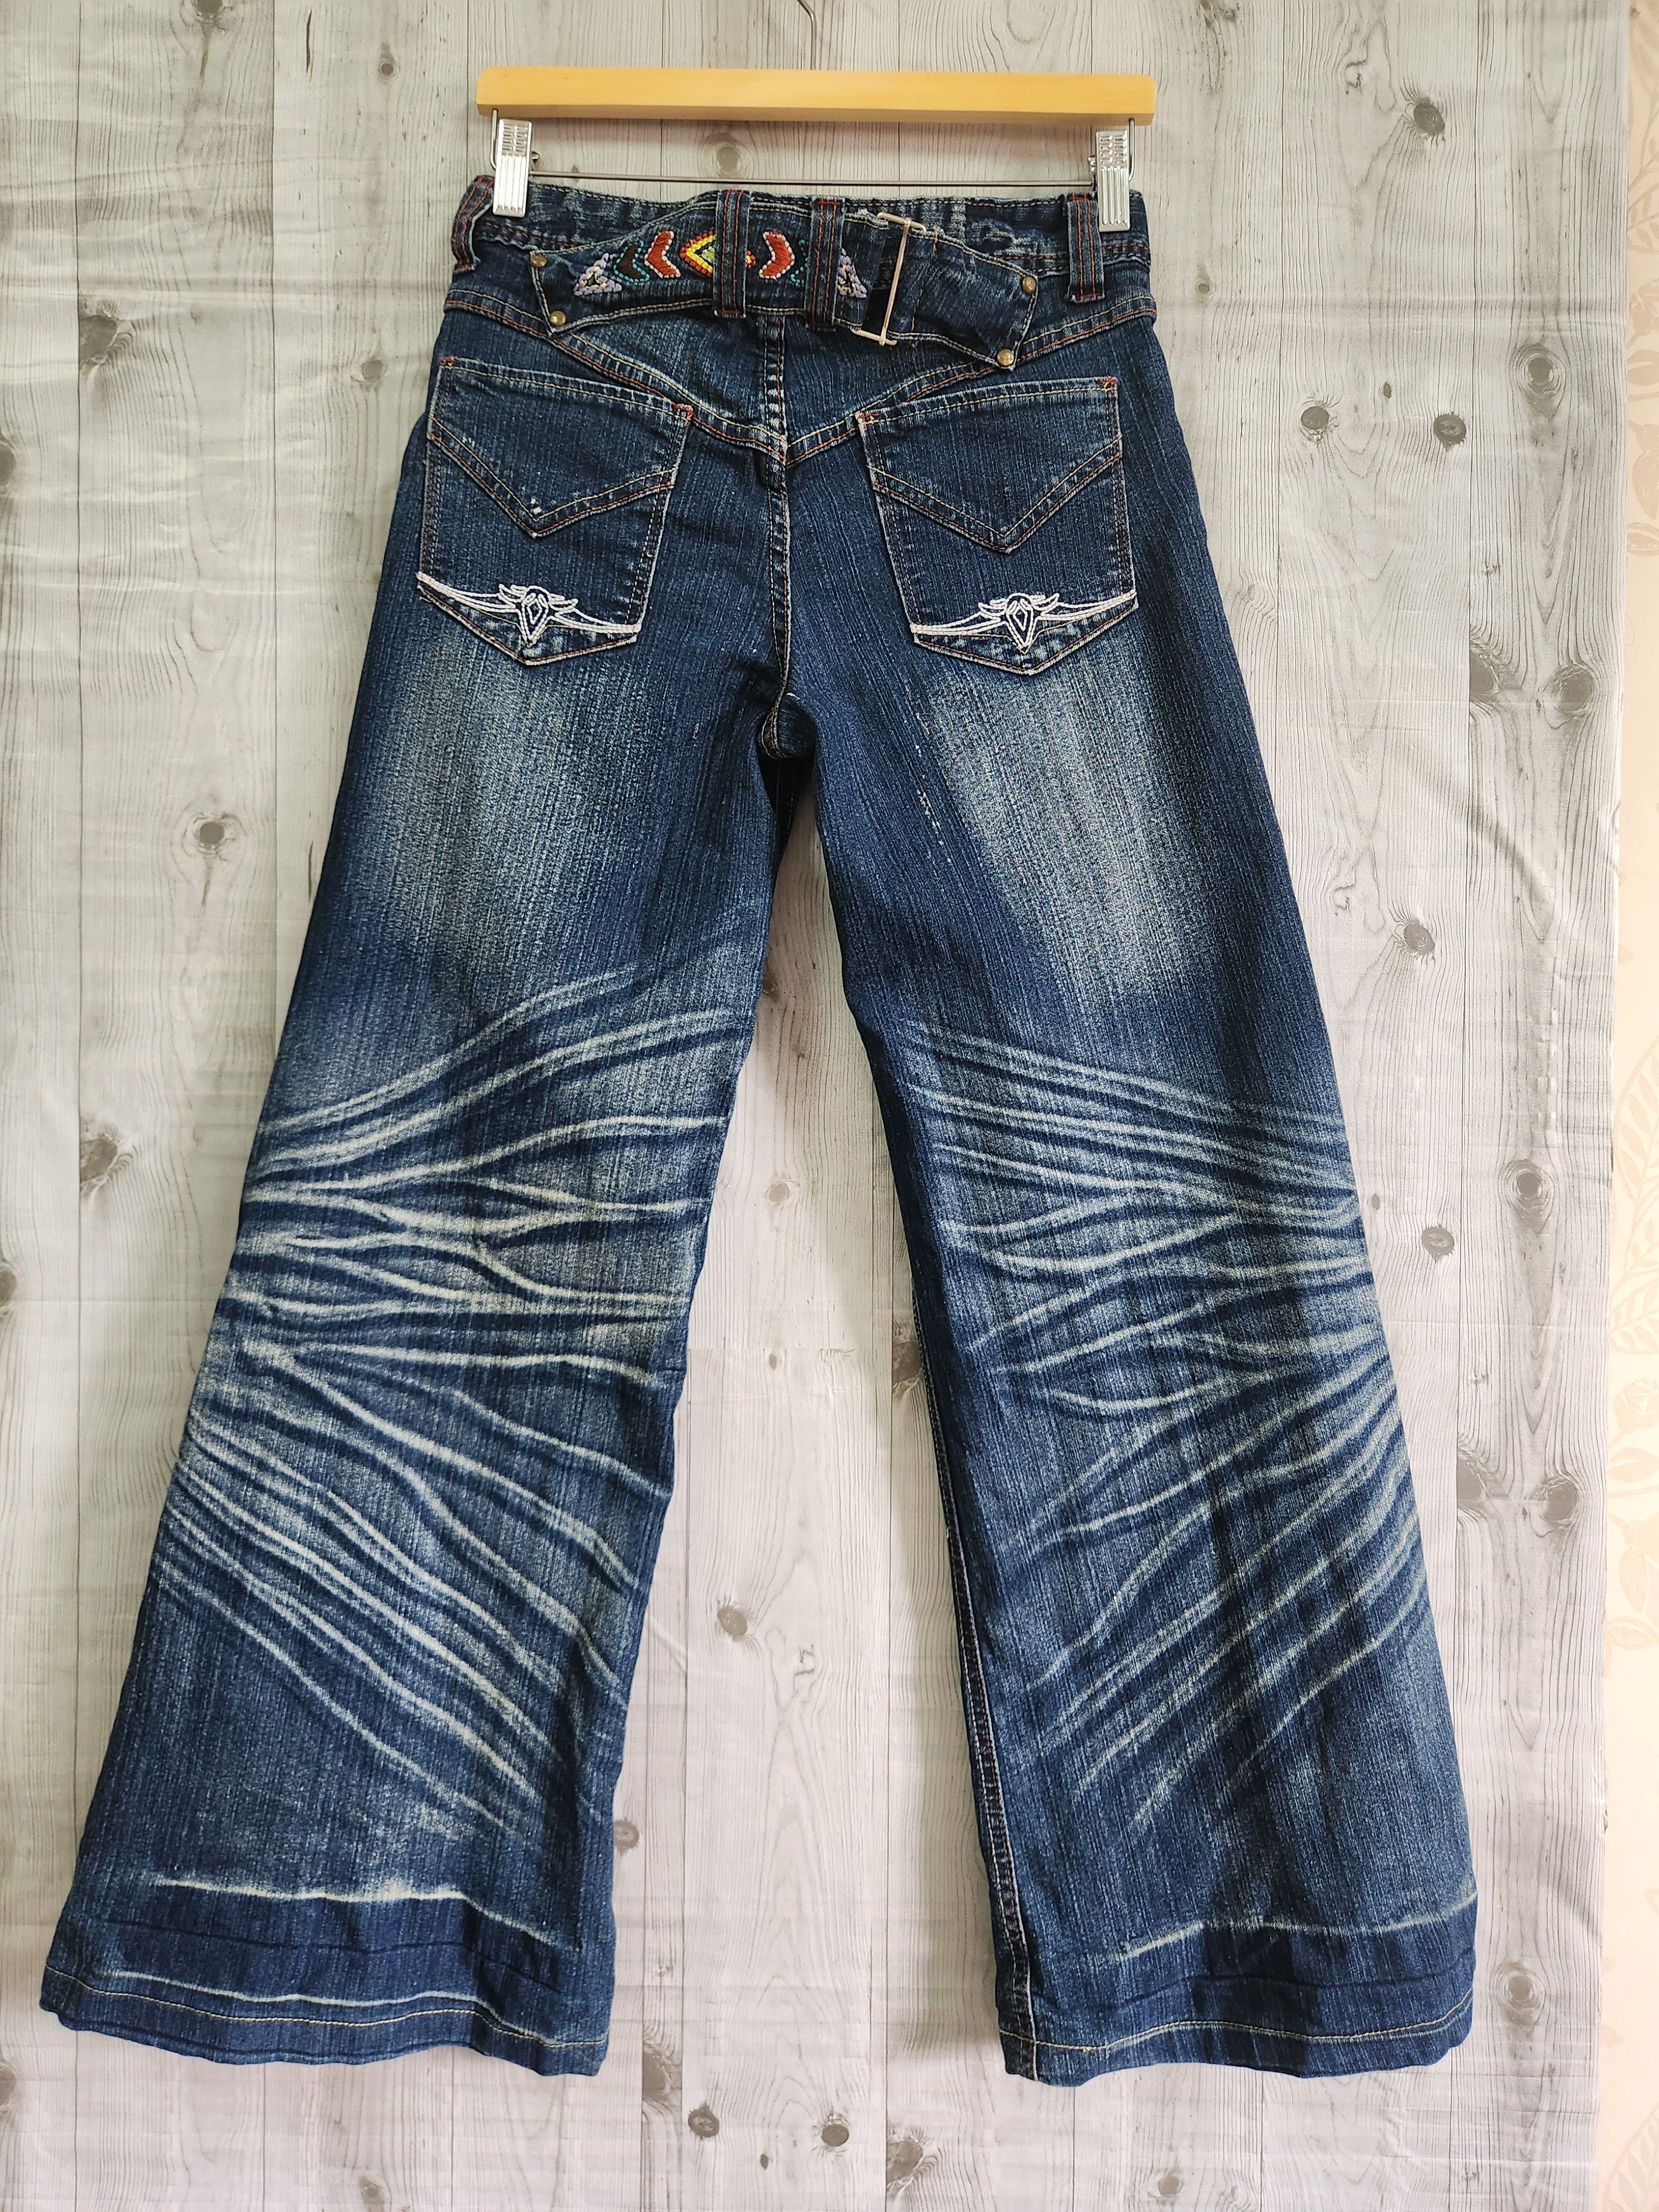 If Six Was Nine - Maxia M2368 Flare Denim Japanese Jeans - 20